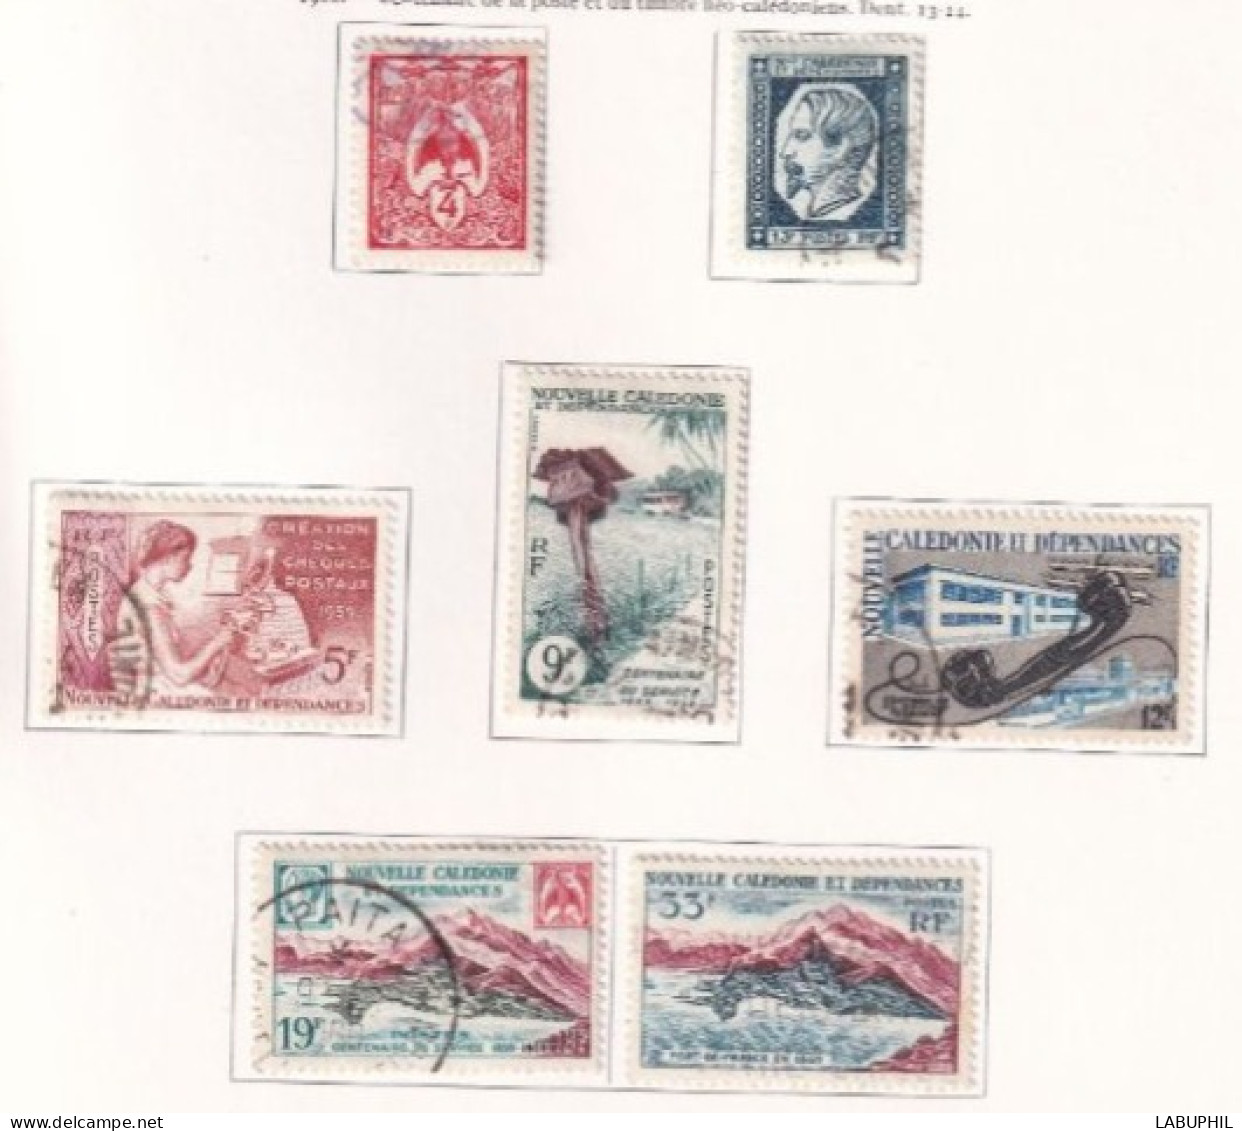 NOUVELLE CALEDONIE Dispersion D'une Collection Oblitéré Used  1960 - Used Stamps